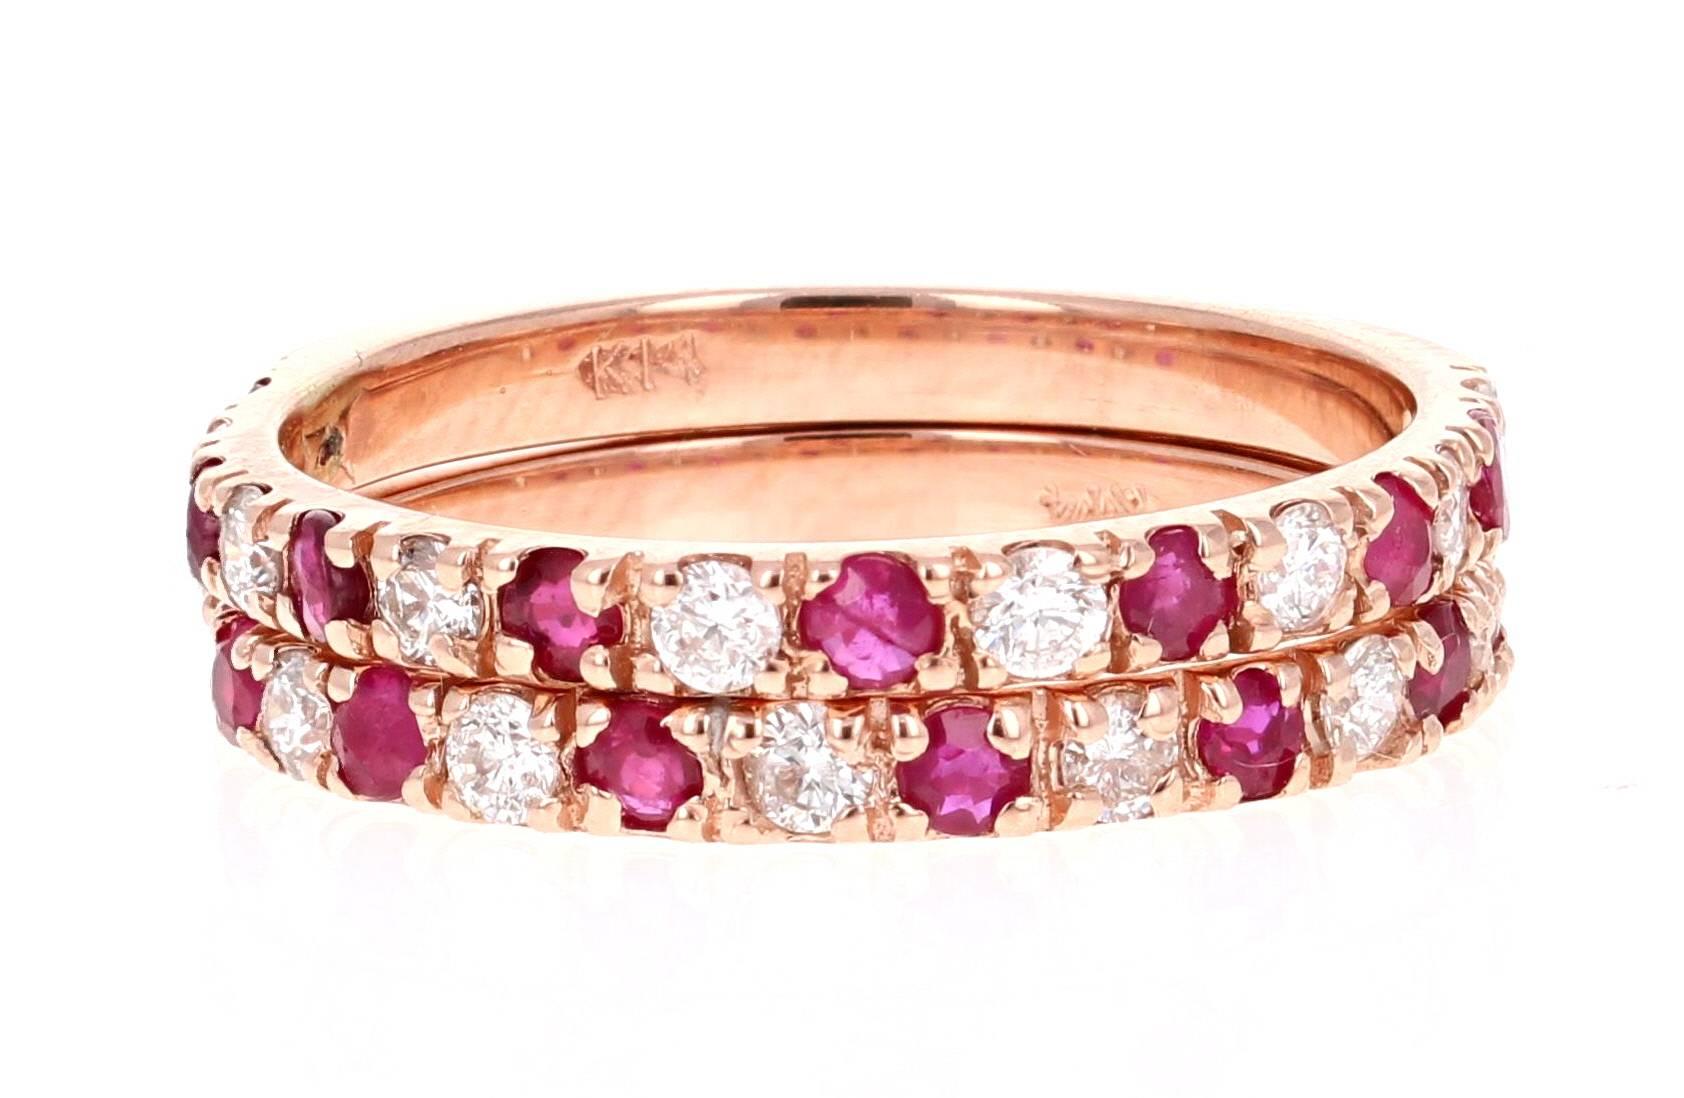 Set of 2 Bands - Diamond and Ruby Rose Gold Stack-able Bands

Elegant and classy 1.22 Carat Diamond and Ruby bands that are sure to be a great addition to your accessory collection!   There are 16 Round Cut Diamonds that weigh 0.48 carats and 16